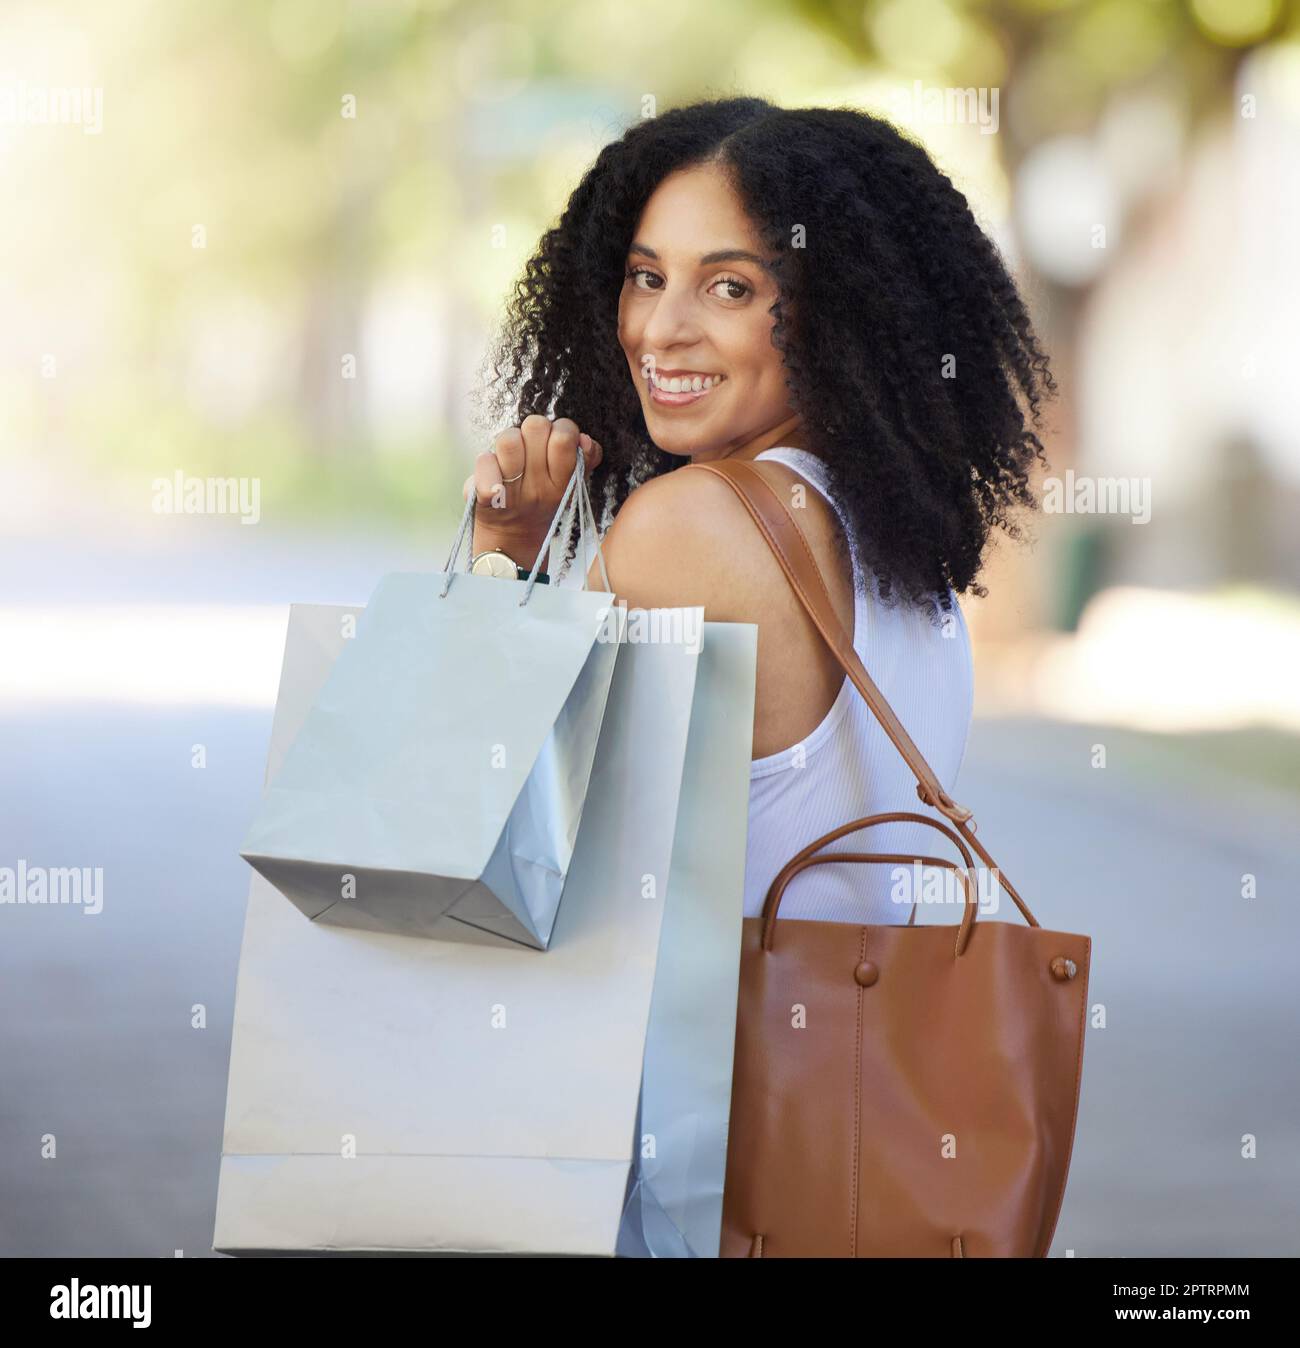 Portrait, fashion and black woman with shopping bag in city after buying clothing at mall. Black Friday deals, sales discount or happy female shopper Stock Photo